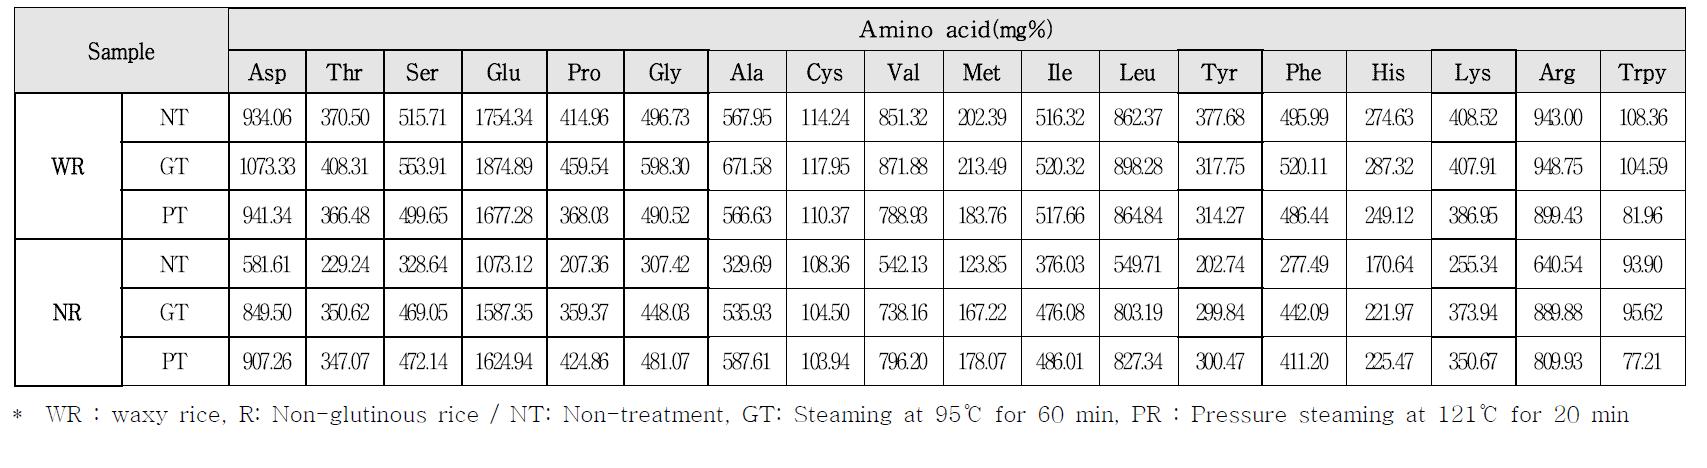 Effect of steaming on amino acid content of rice for preparation of Olbyeossal from rough rice